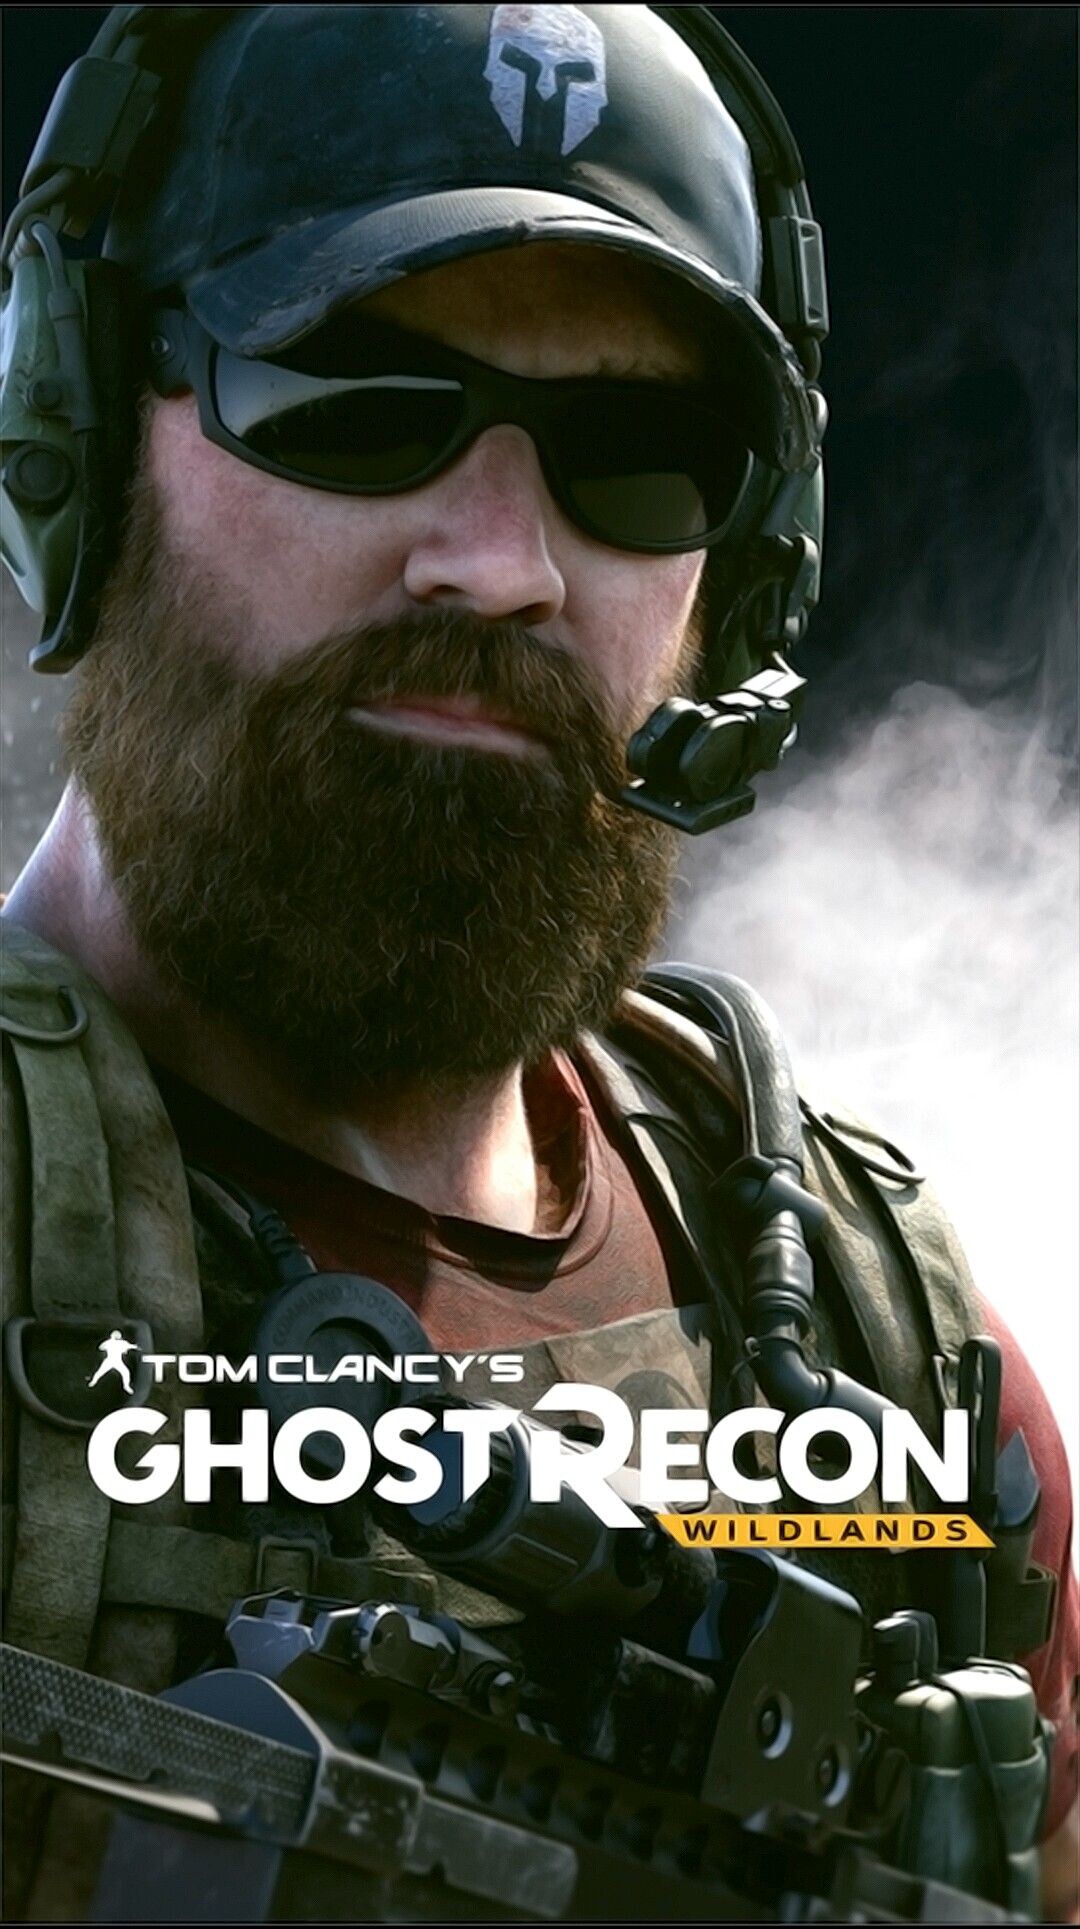 Ghost Recon: Wildlands: Major Cole D. Walker, Operation Oracle operative, The main antagonist in the next game - Breakpoint. 1080x1930 HD Wallpaper.